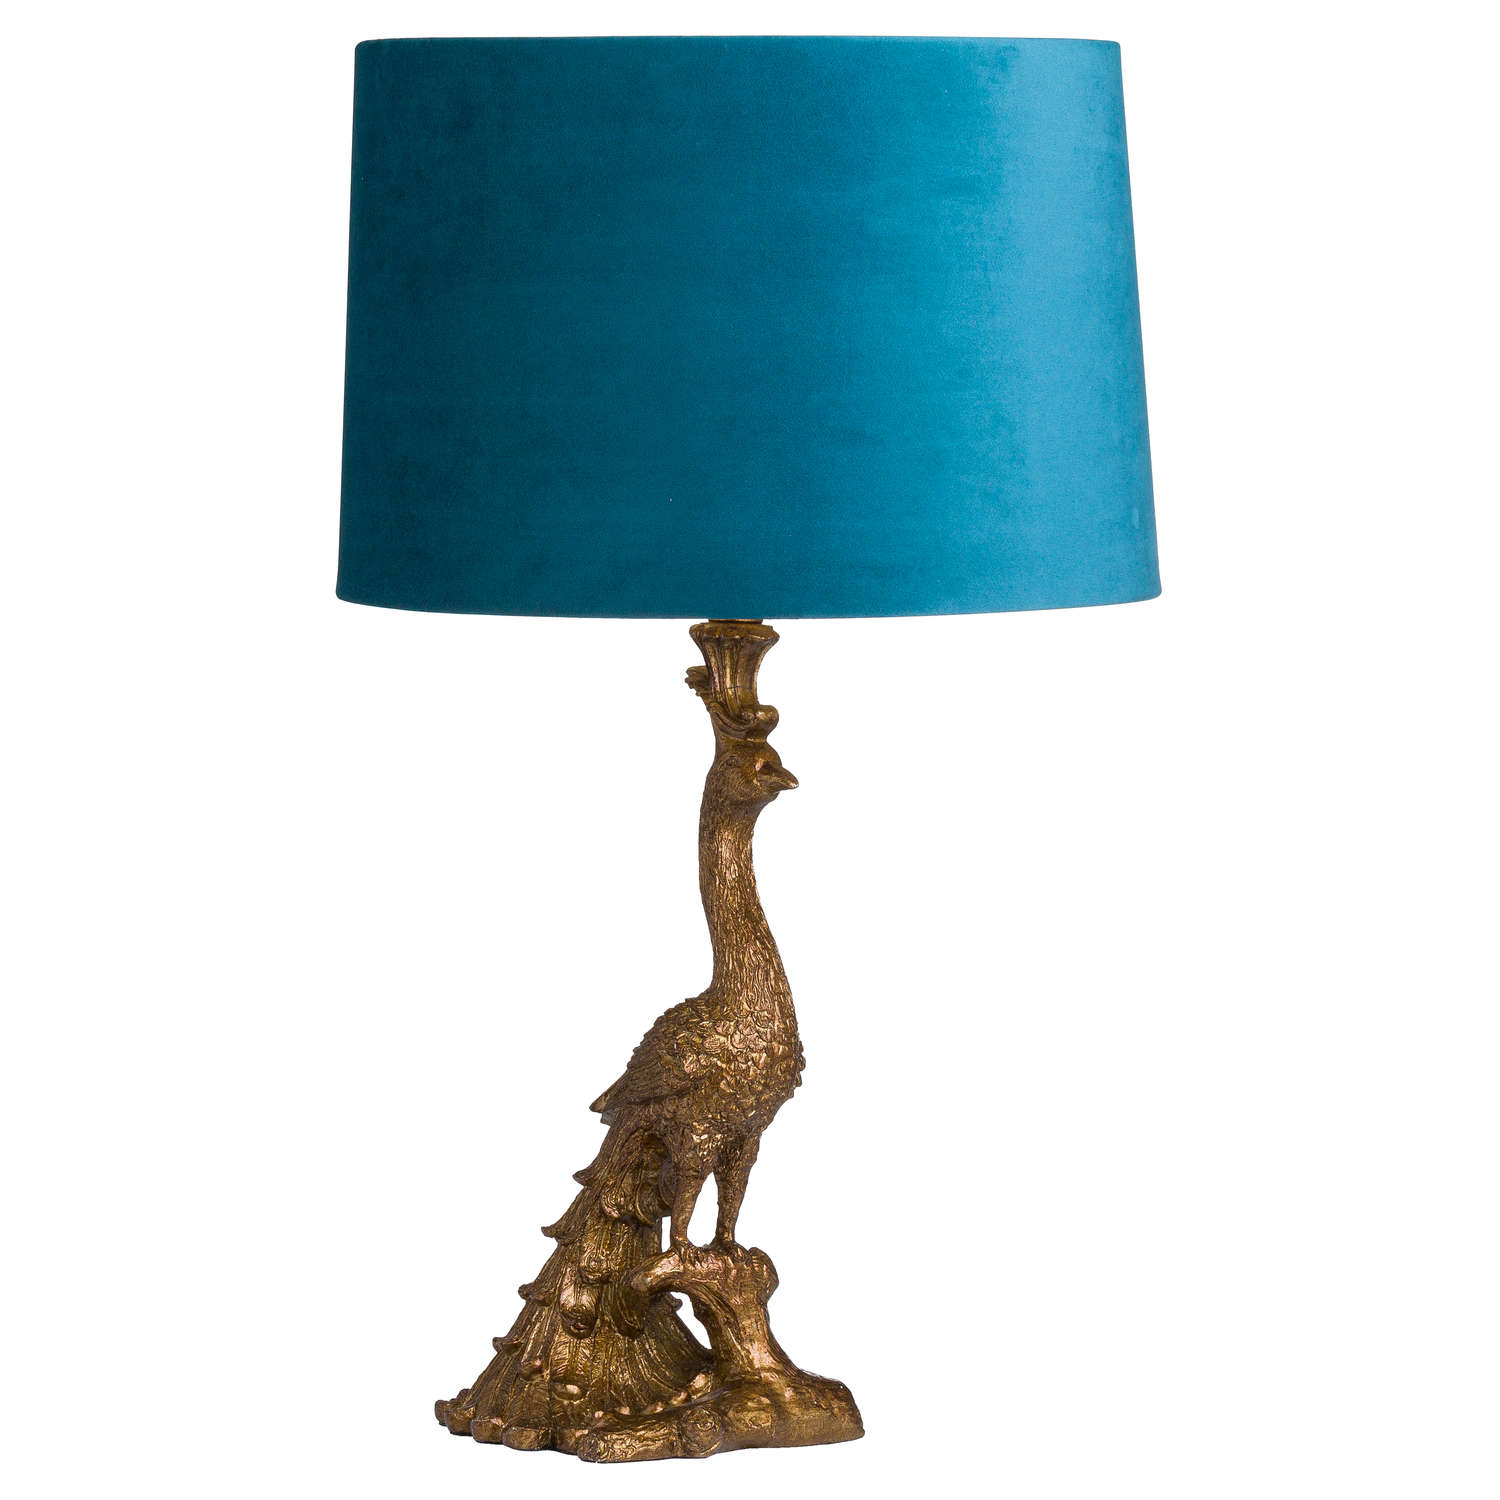 Antique Gold Peacock Lamp With Teal Velvet Shade - Image 1